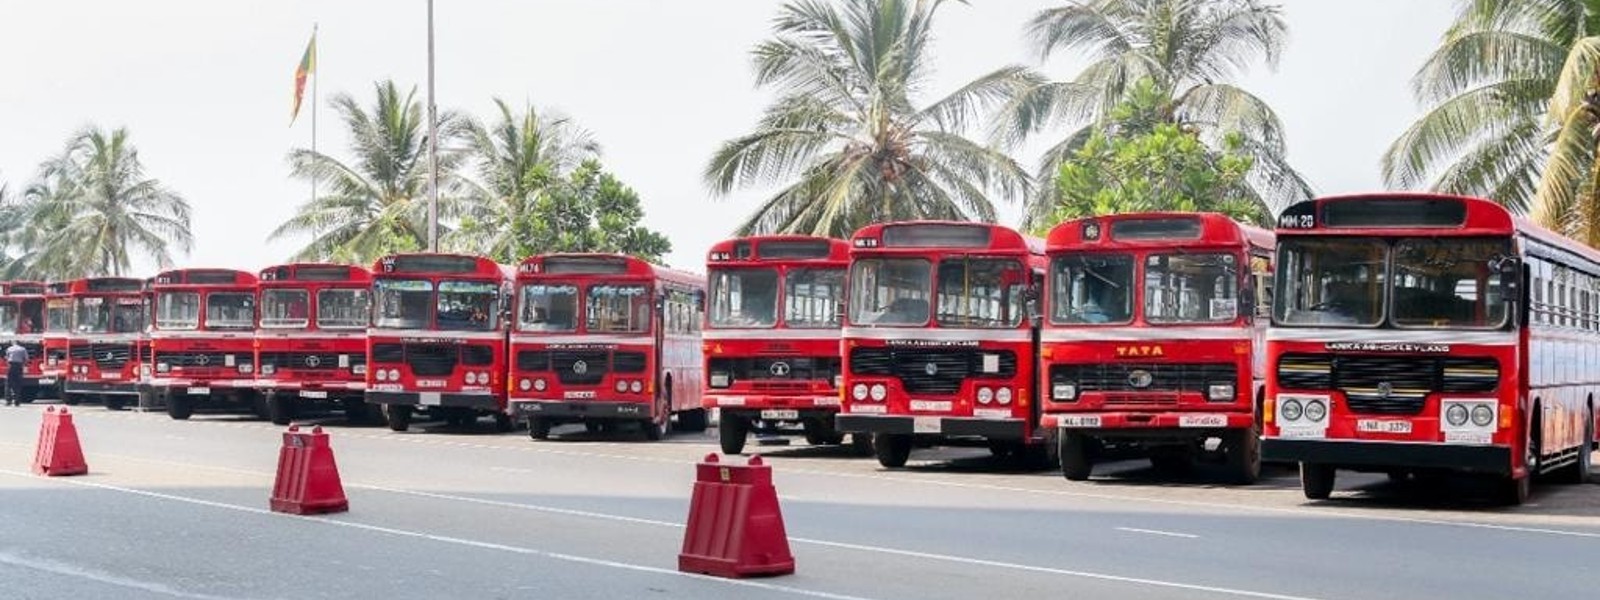 SLTB workers on strike; Bus services affected